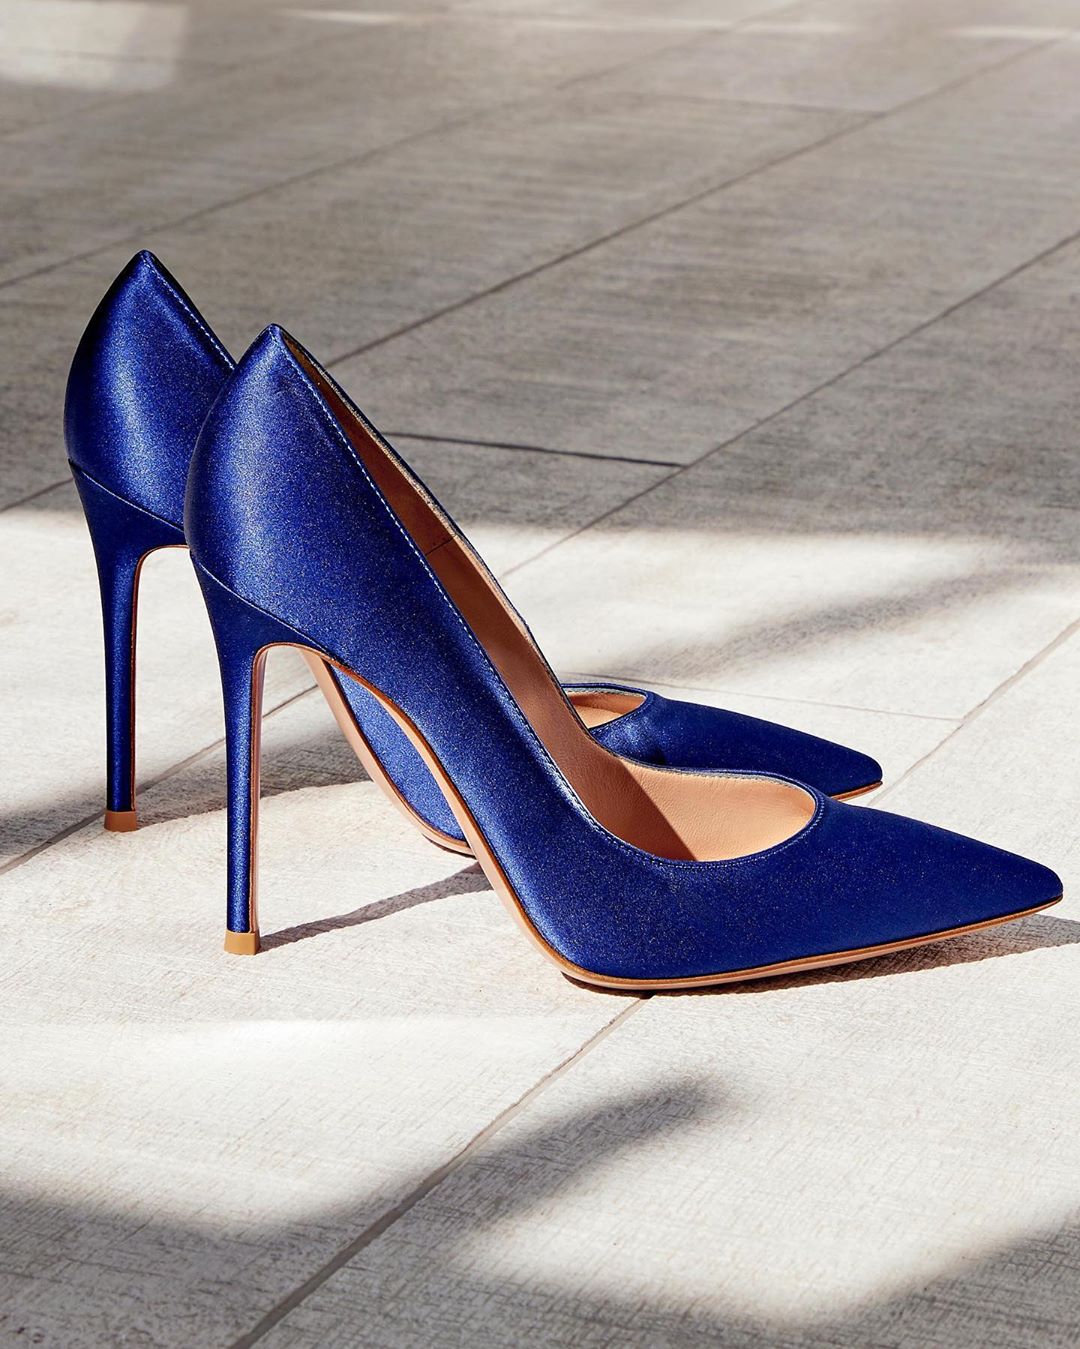 THE OUTNET - Oh navy blue, how we love you — especially in heel form 💙

Shop all your favorite Instagram looks, just visit #linkinbio